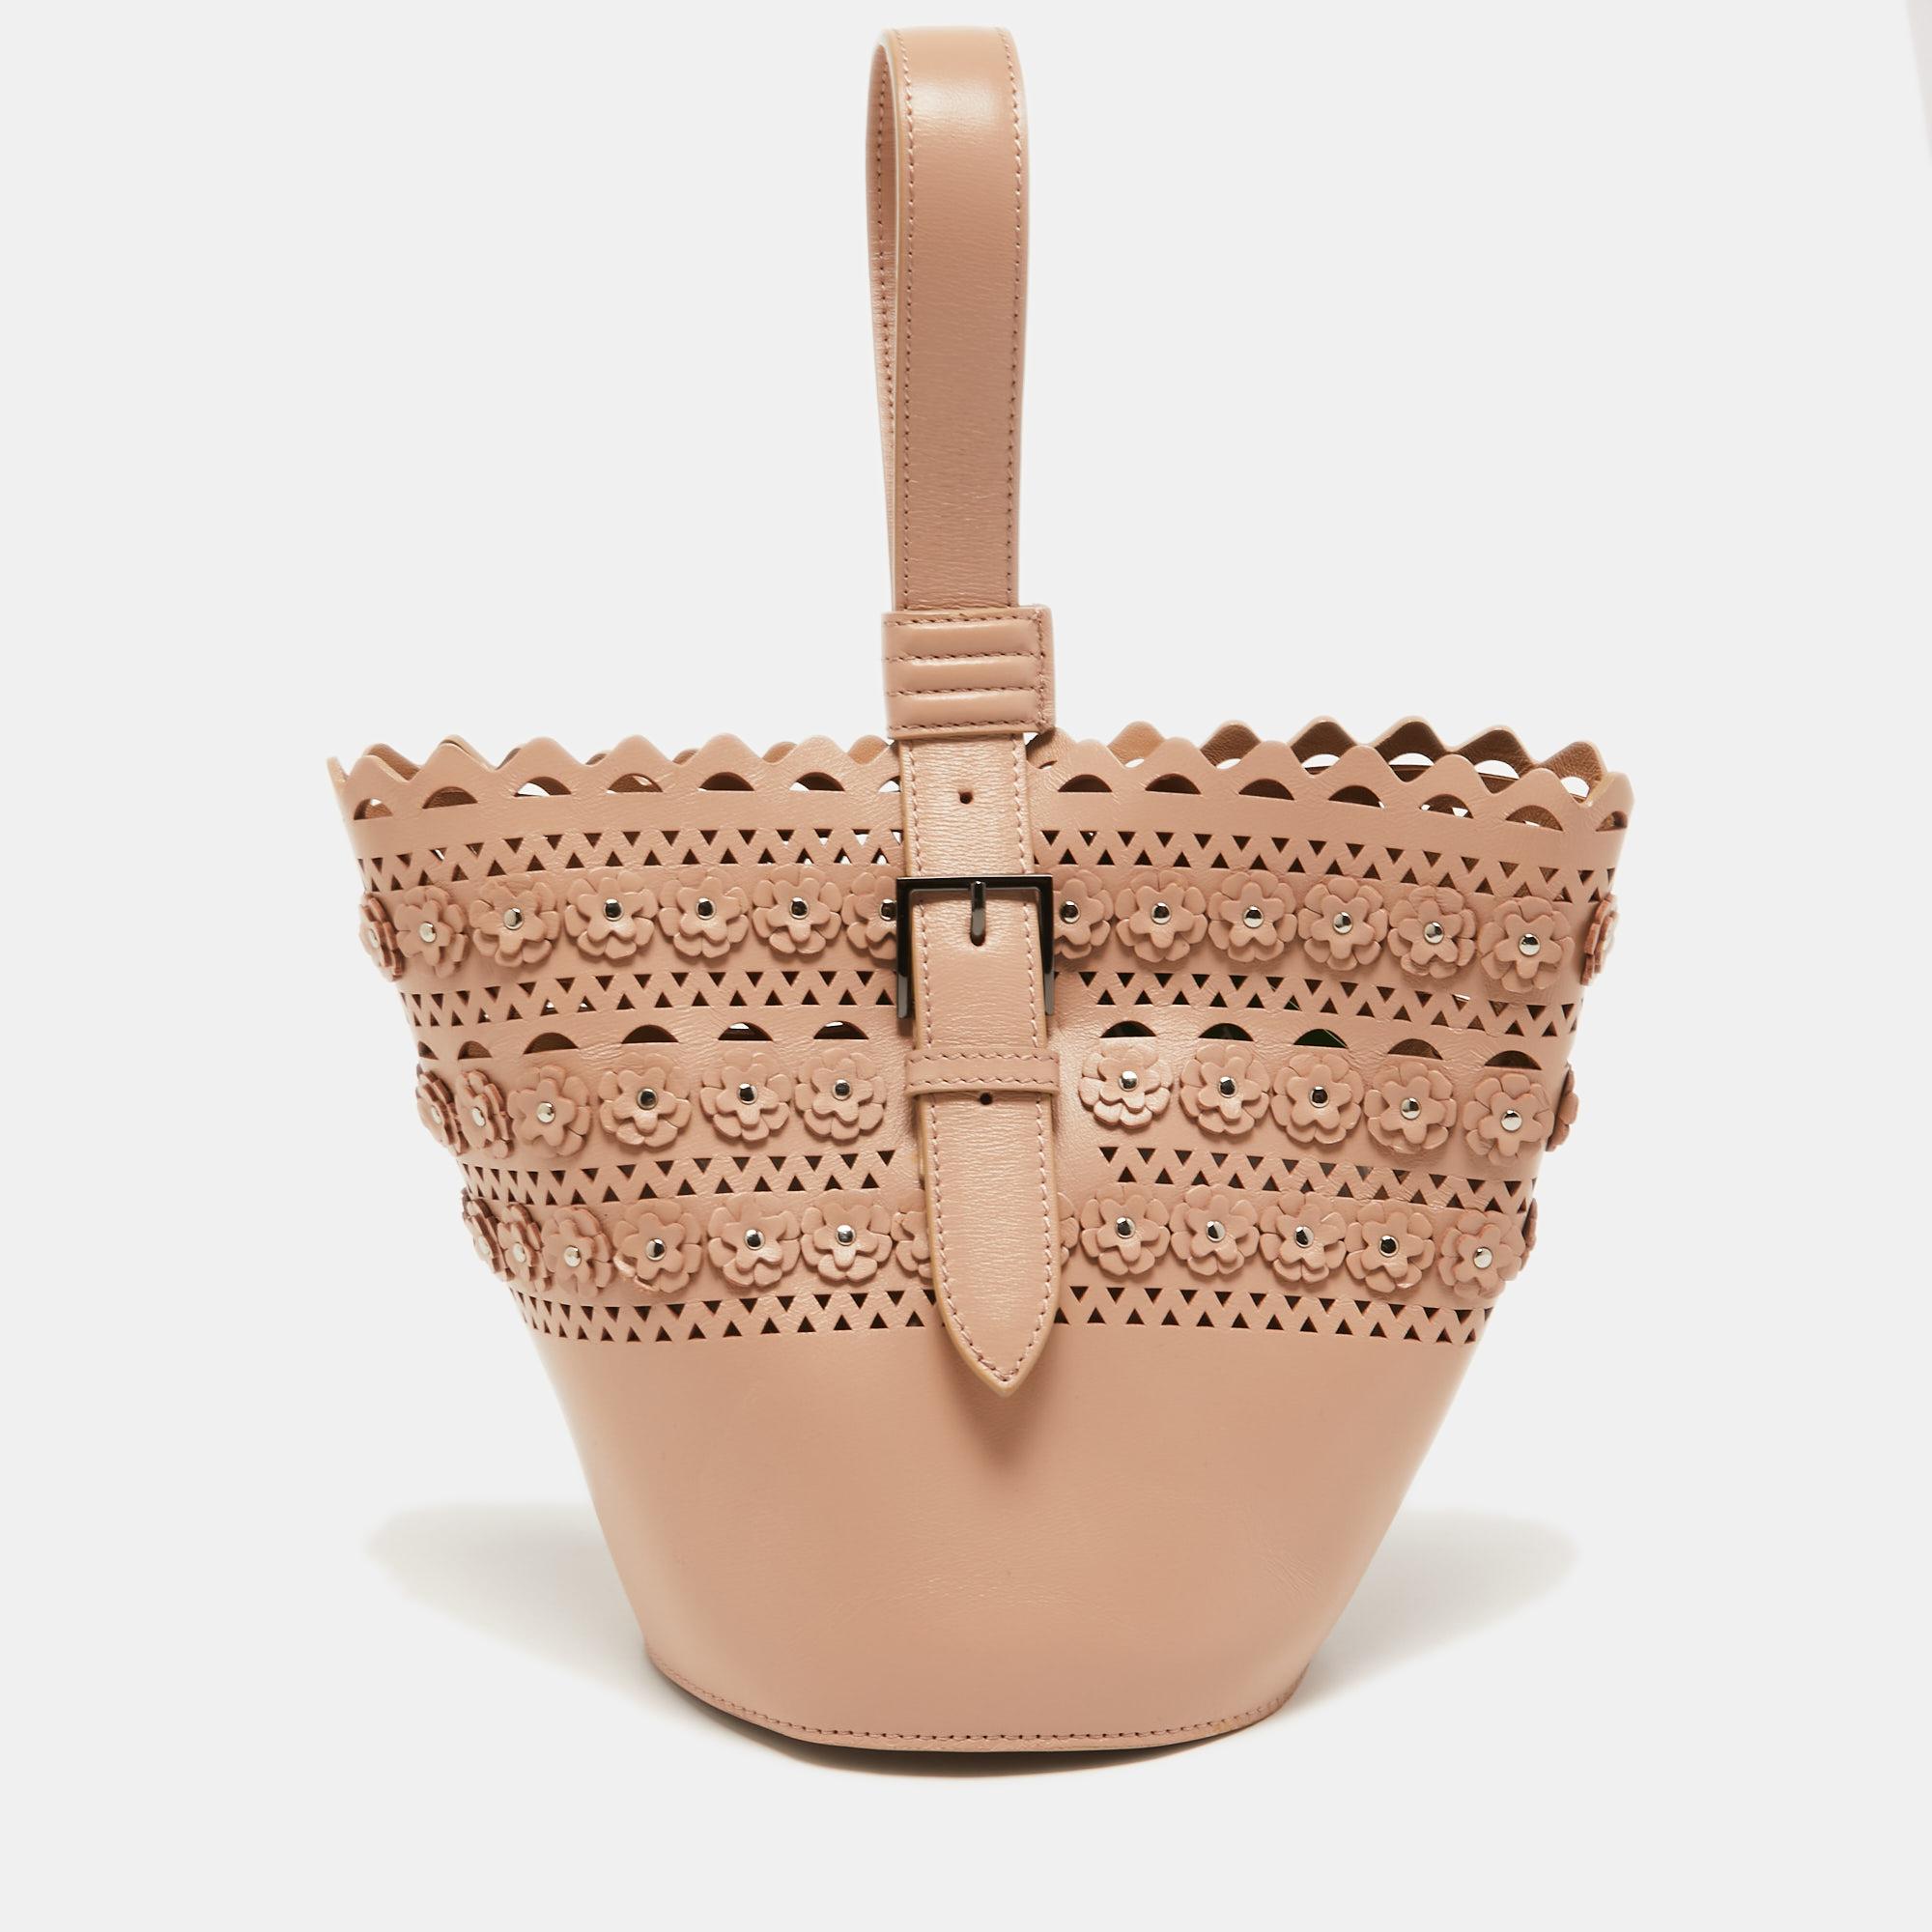 We bring you this carefully-designed bag, crafted with love using leather. It arrives in a bucket shape and is designed with a single buckled handle and a spacious interior. The beige bag by Alaia is durable and fashionable.

